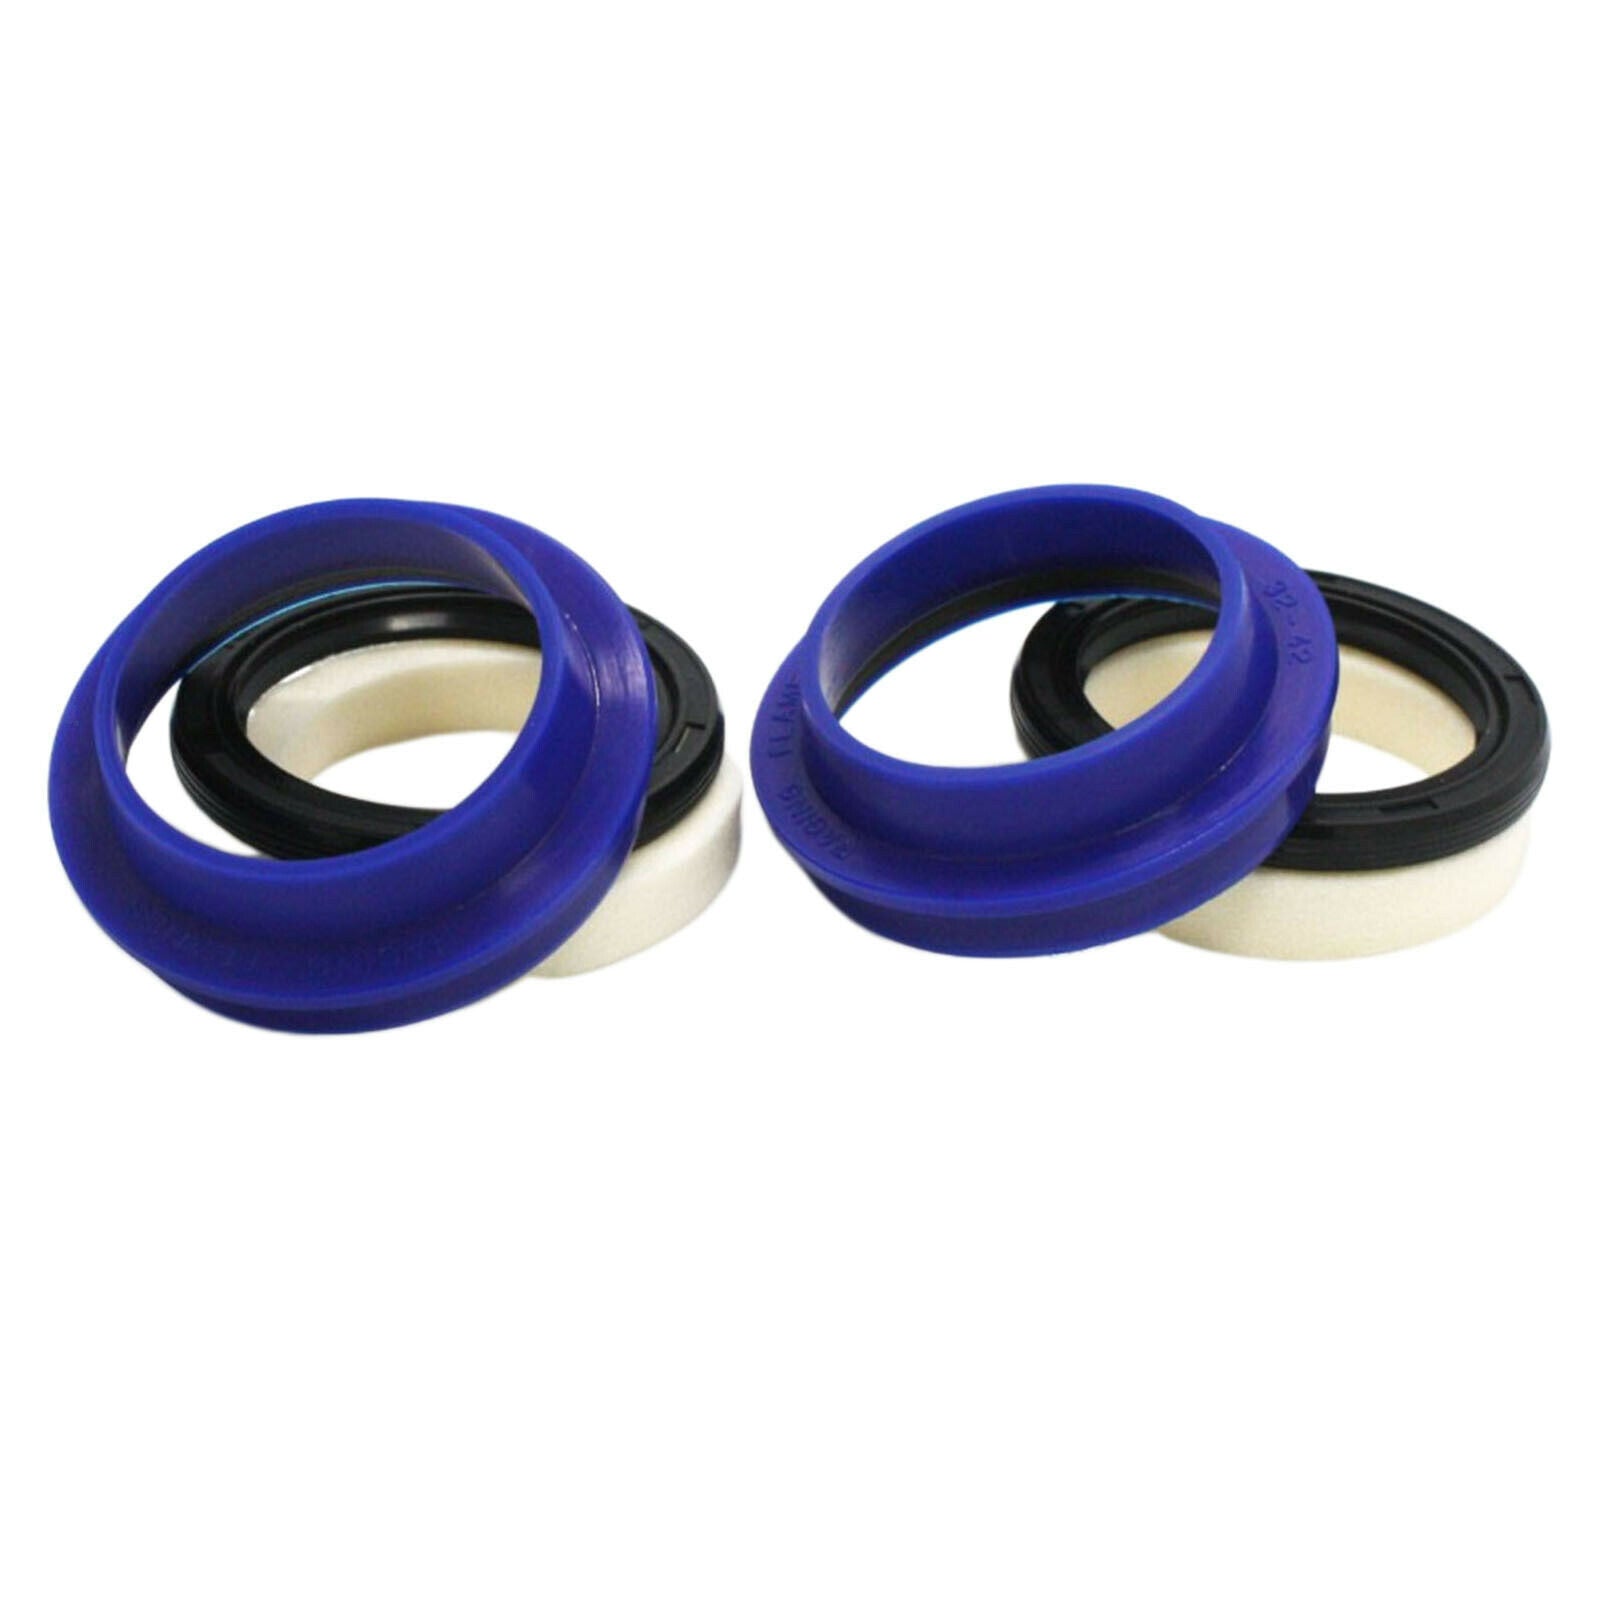 Bicycle Front Fork Dust Seal Ring Rubber Durable High Performance Service Oil